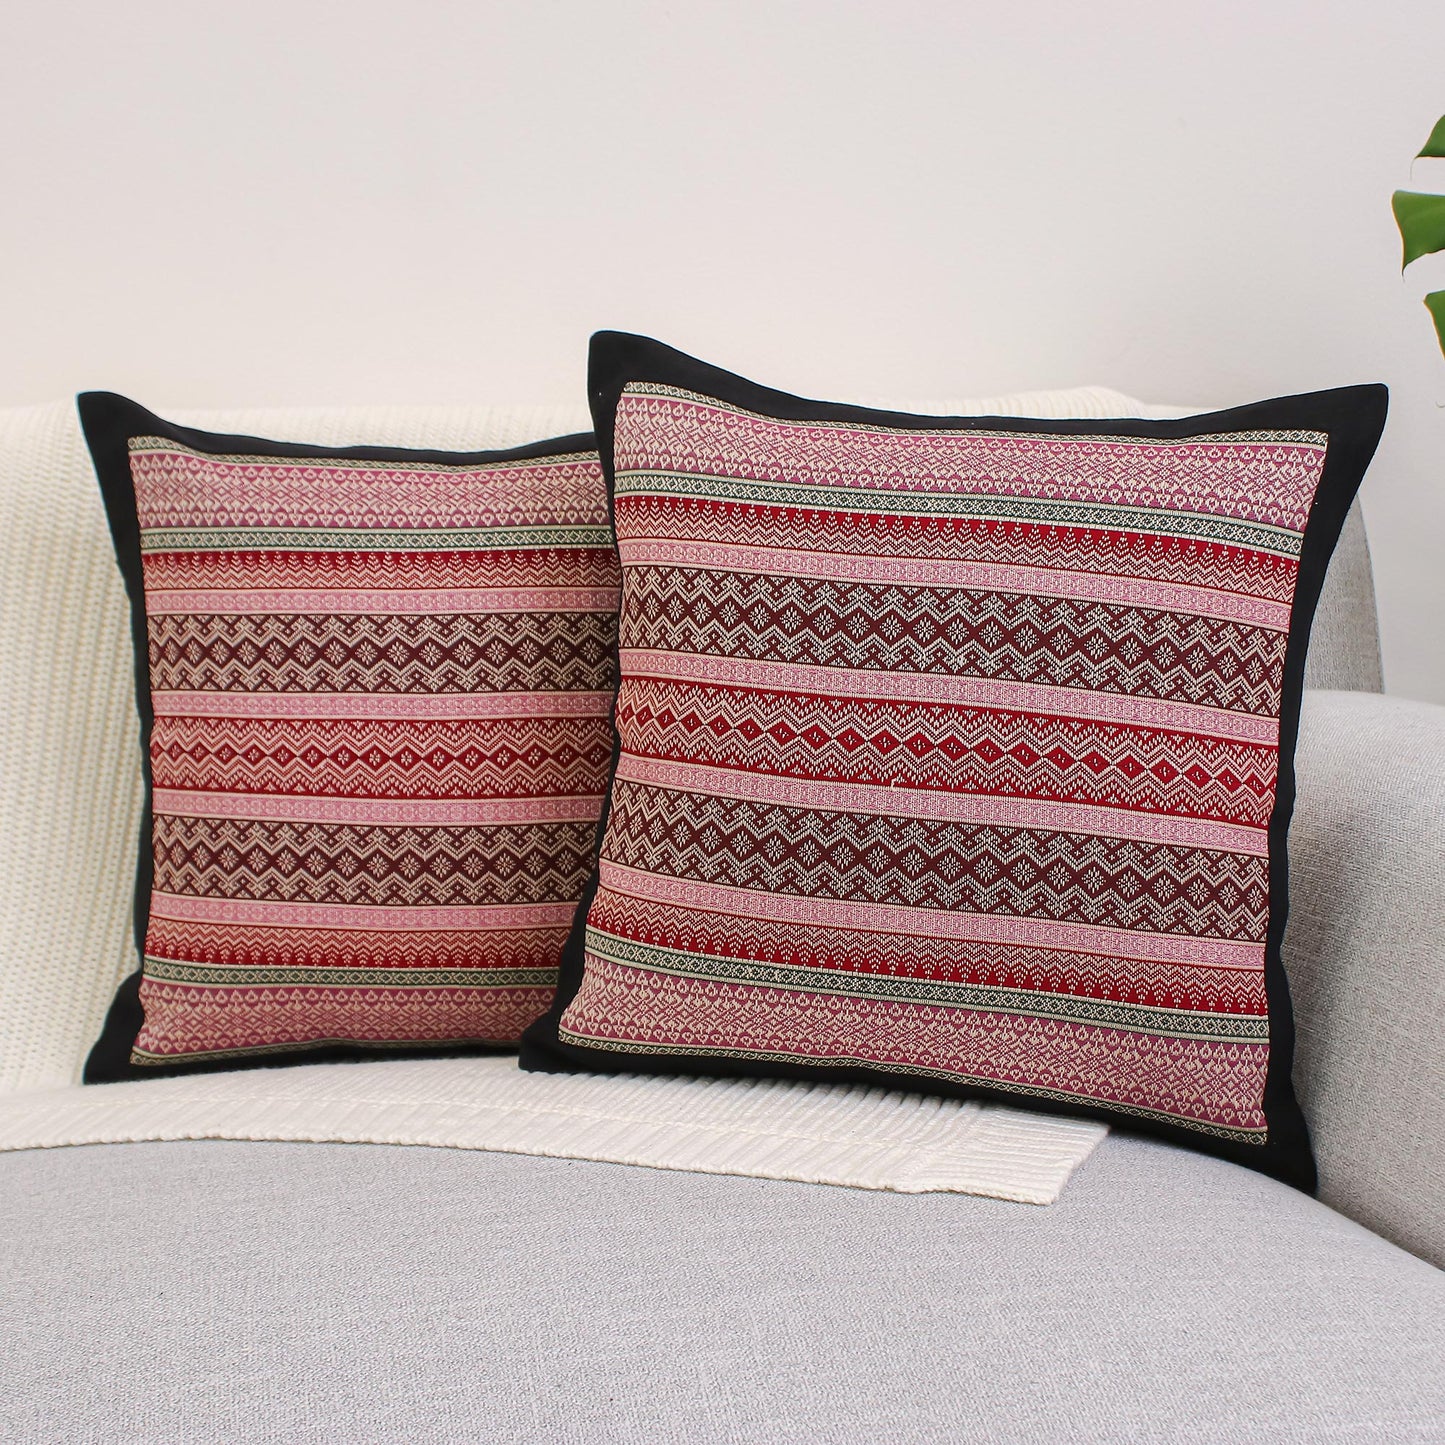 Enchanted Thai Orchids Handwoven Thai Cushion Covers in Pink and Red (Pair)